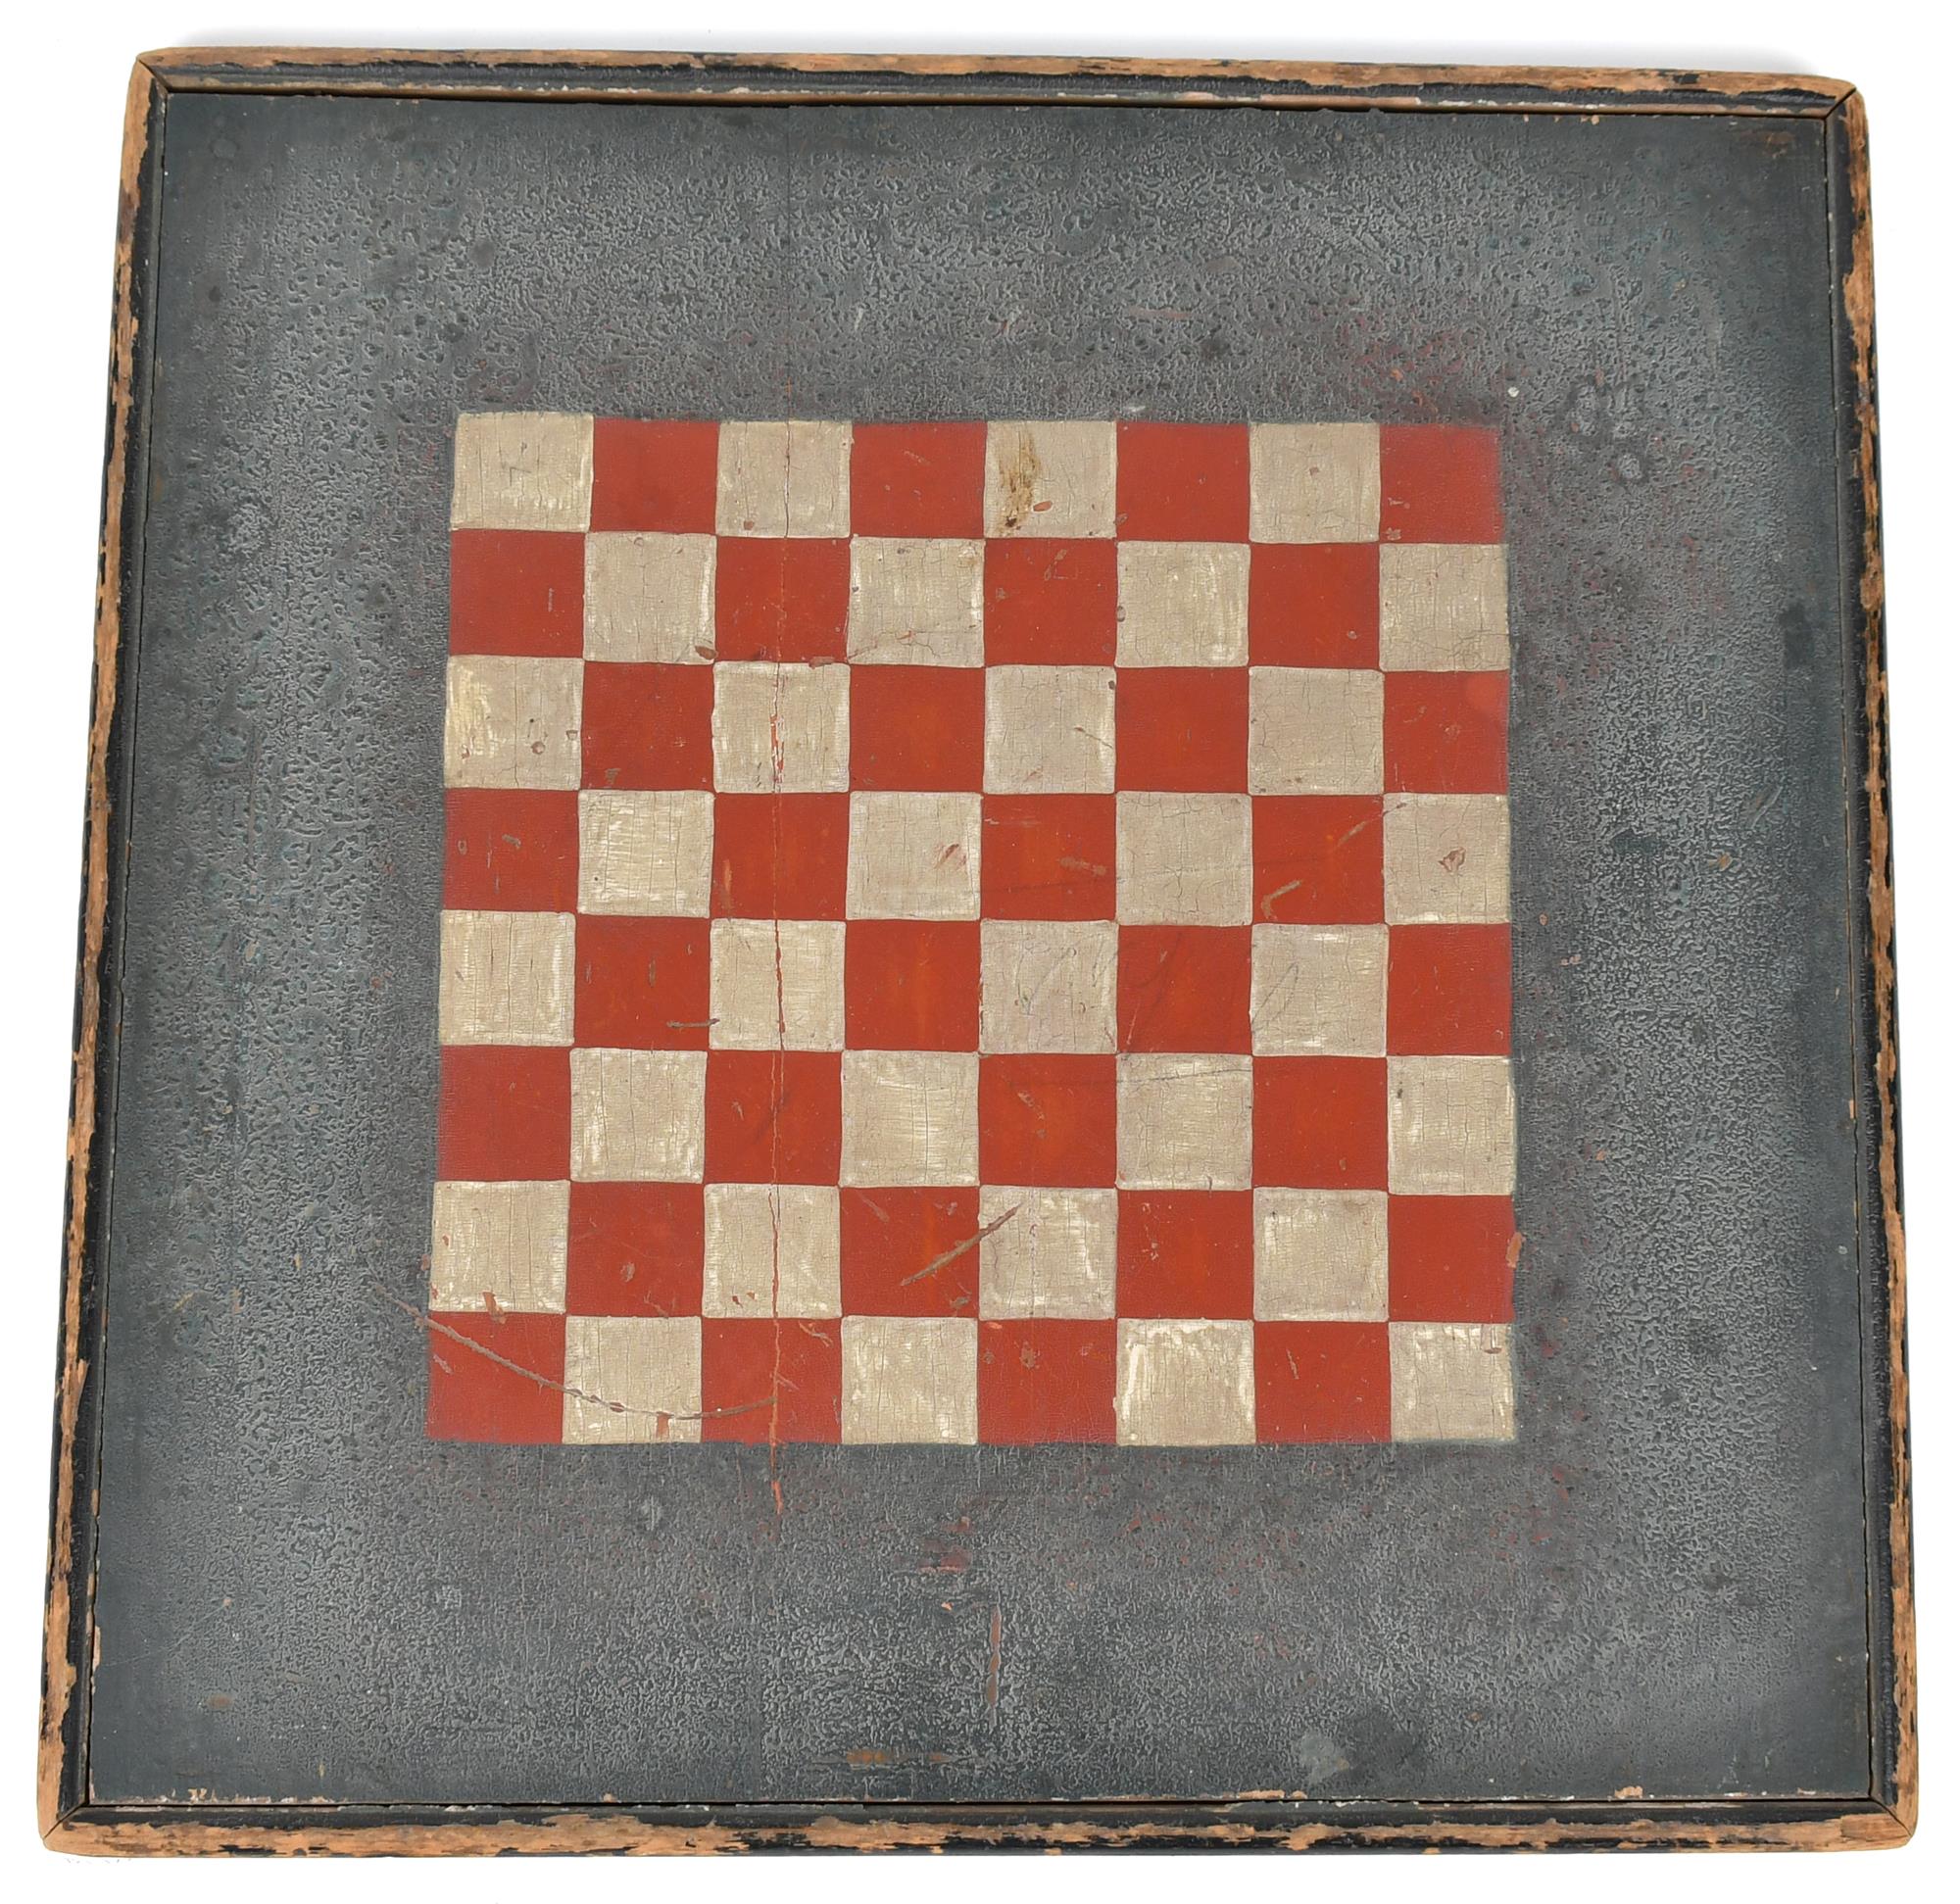 NICE 19TH C. PAINTED GAME BOARD,